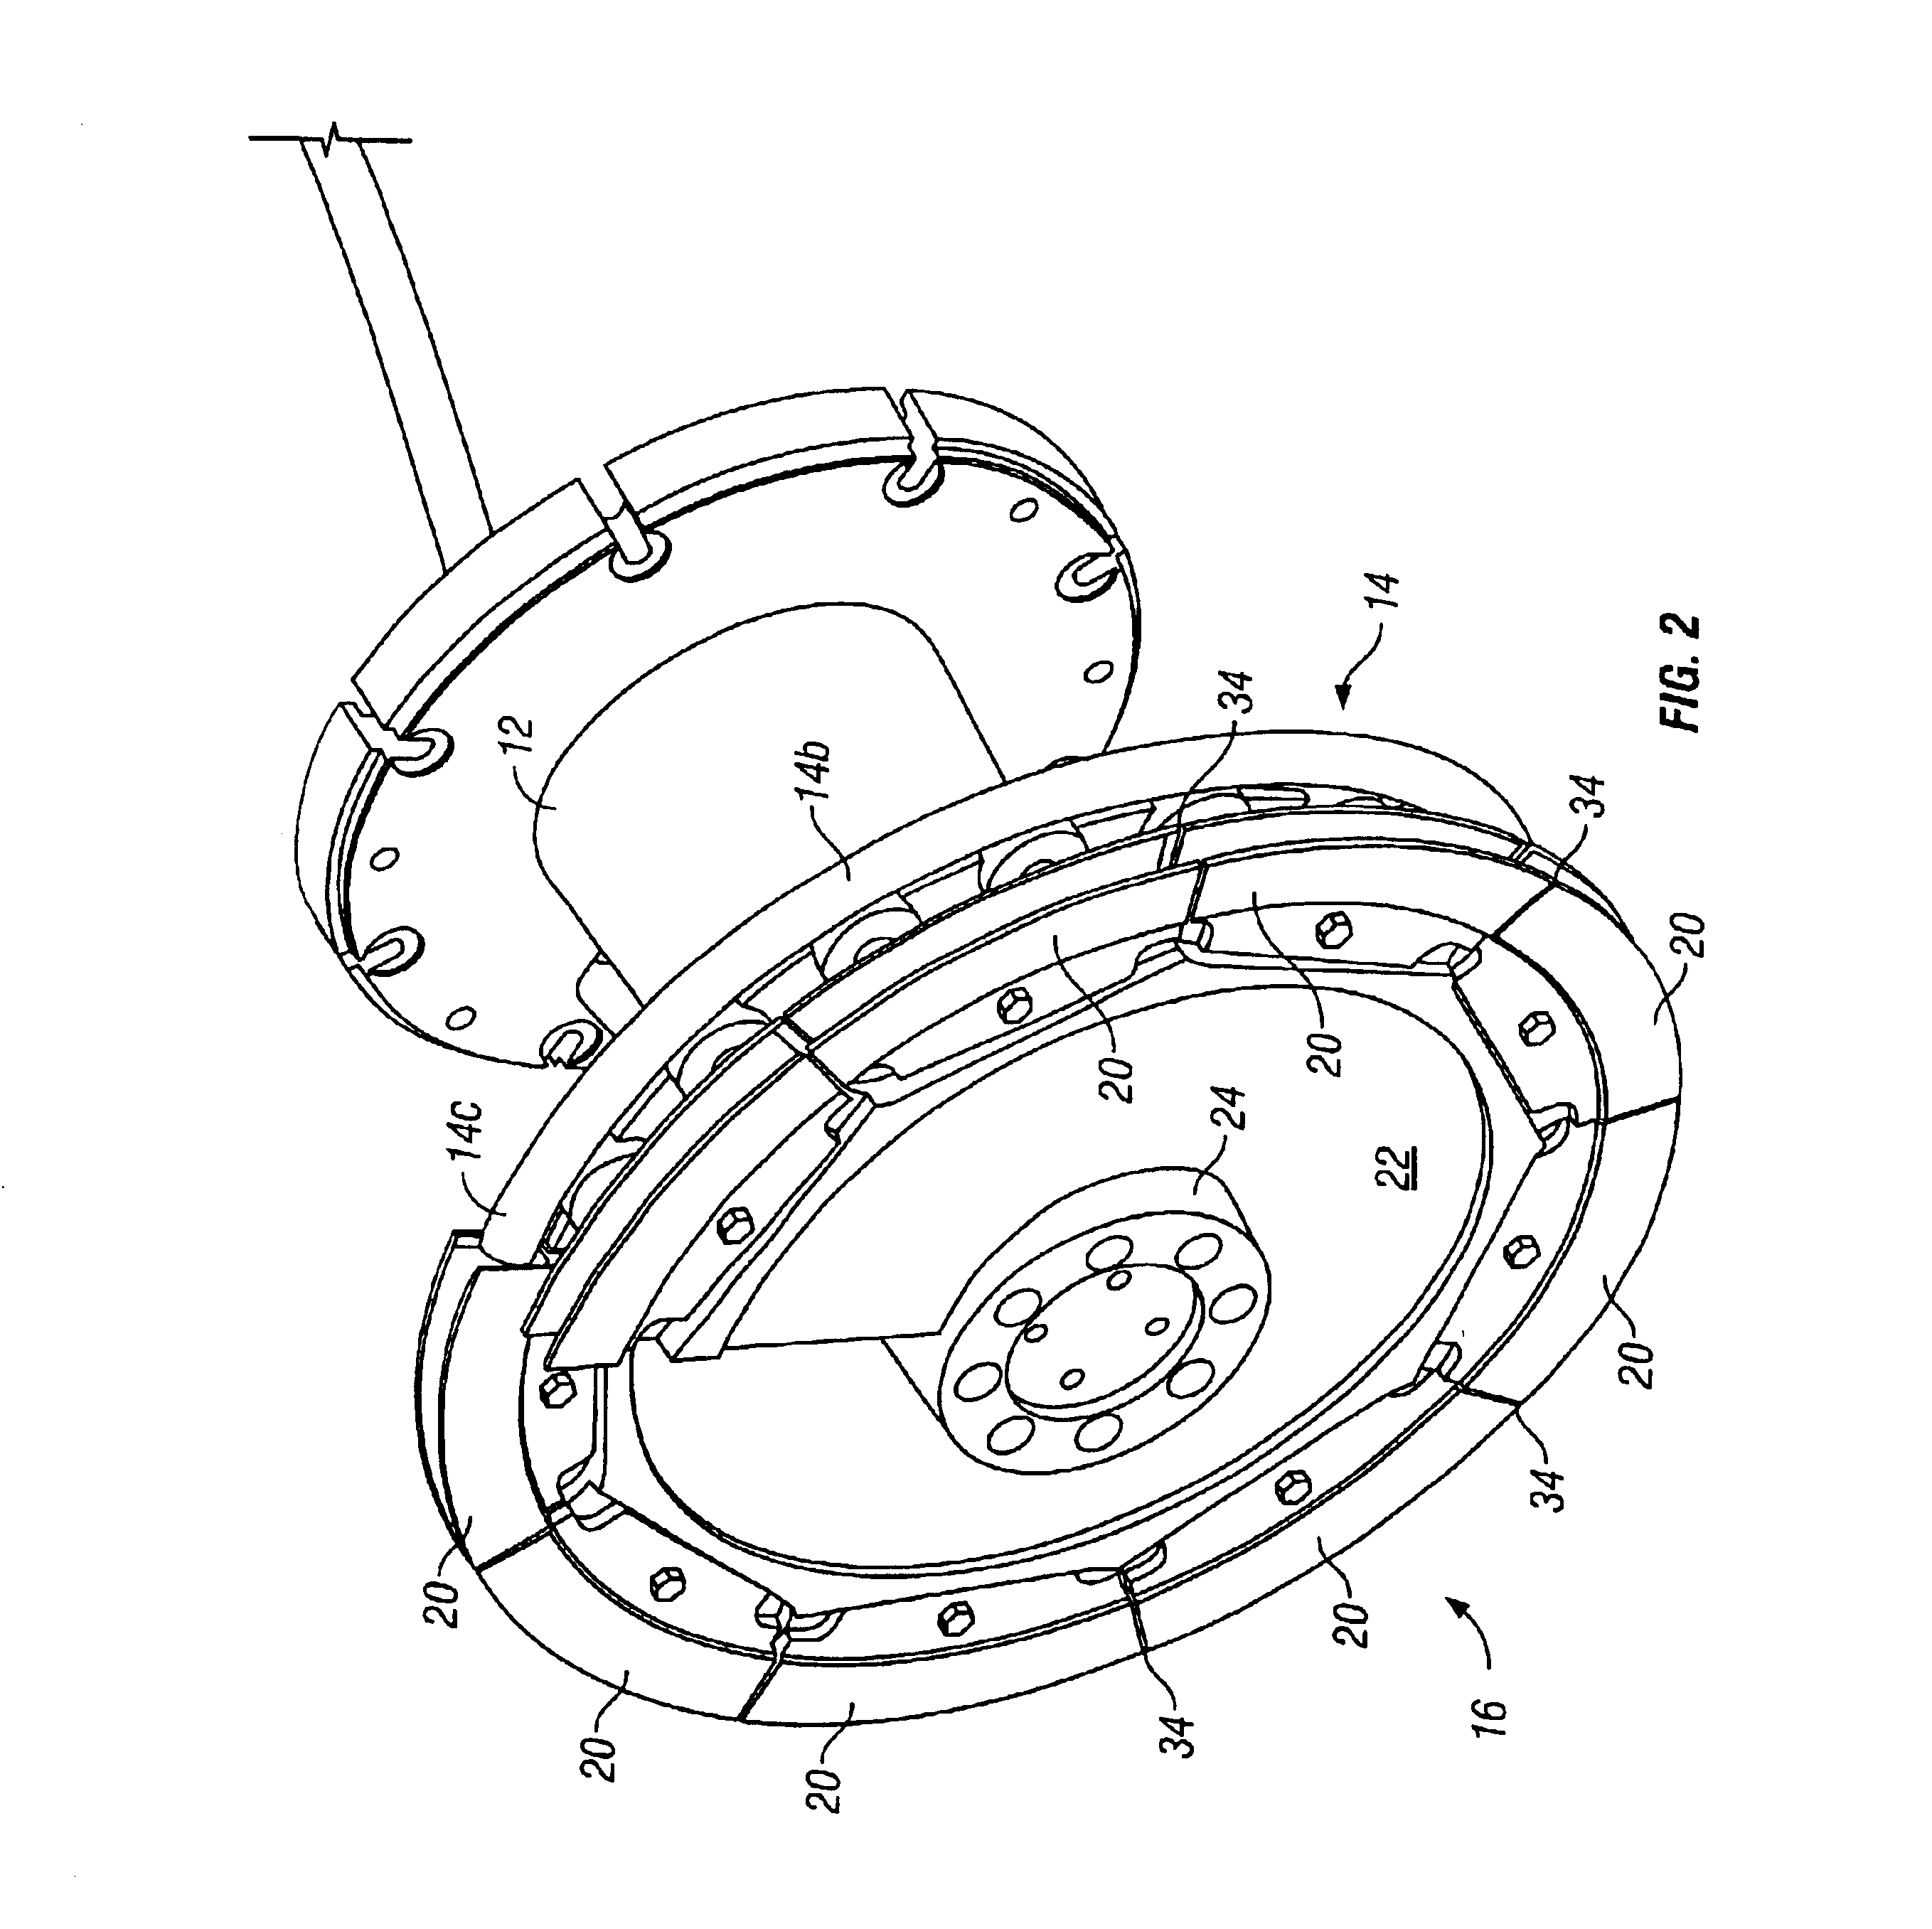 Segmented ring guide for rolling mill laying head